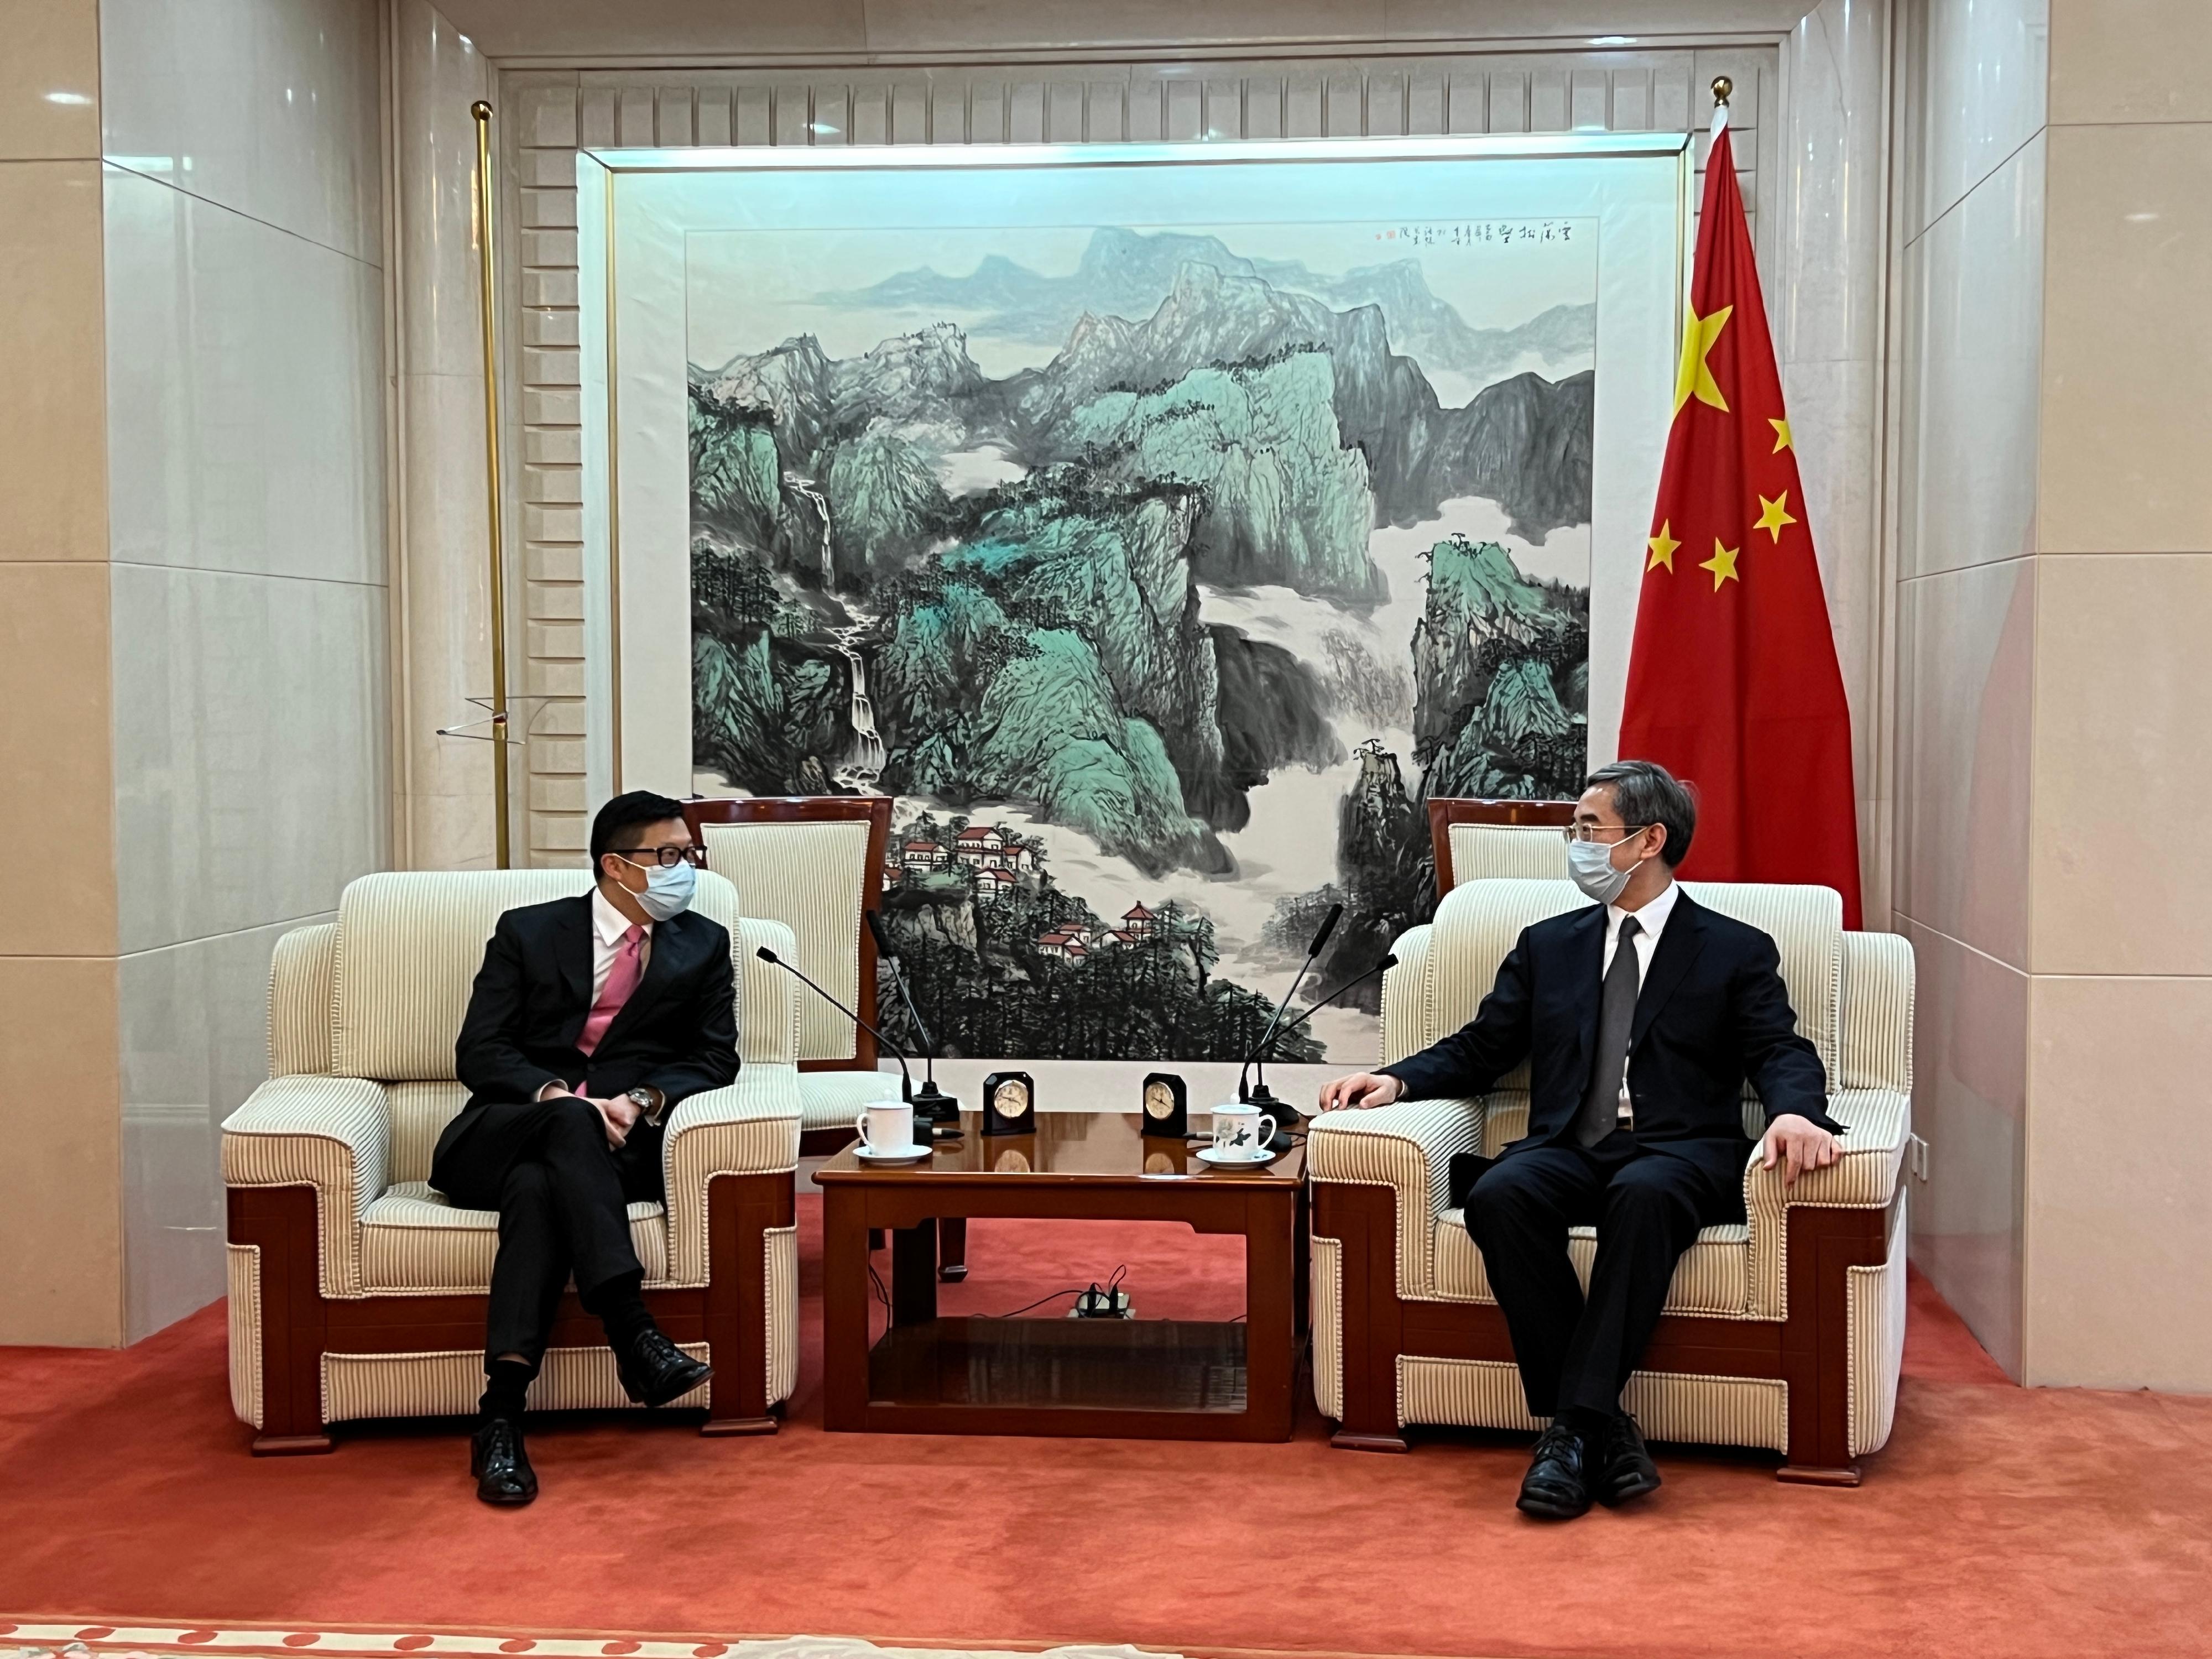 The Secretary for Security, Mr Tang Ping-keung, continued the second day of his visit to Beijing today (April 25). Photo shows Mr Tang (left) calling on the Ministry of Transport and meeting with Vice-Minister of Transport Mr Dai Dongchang (right).